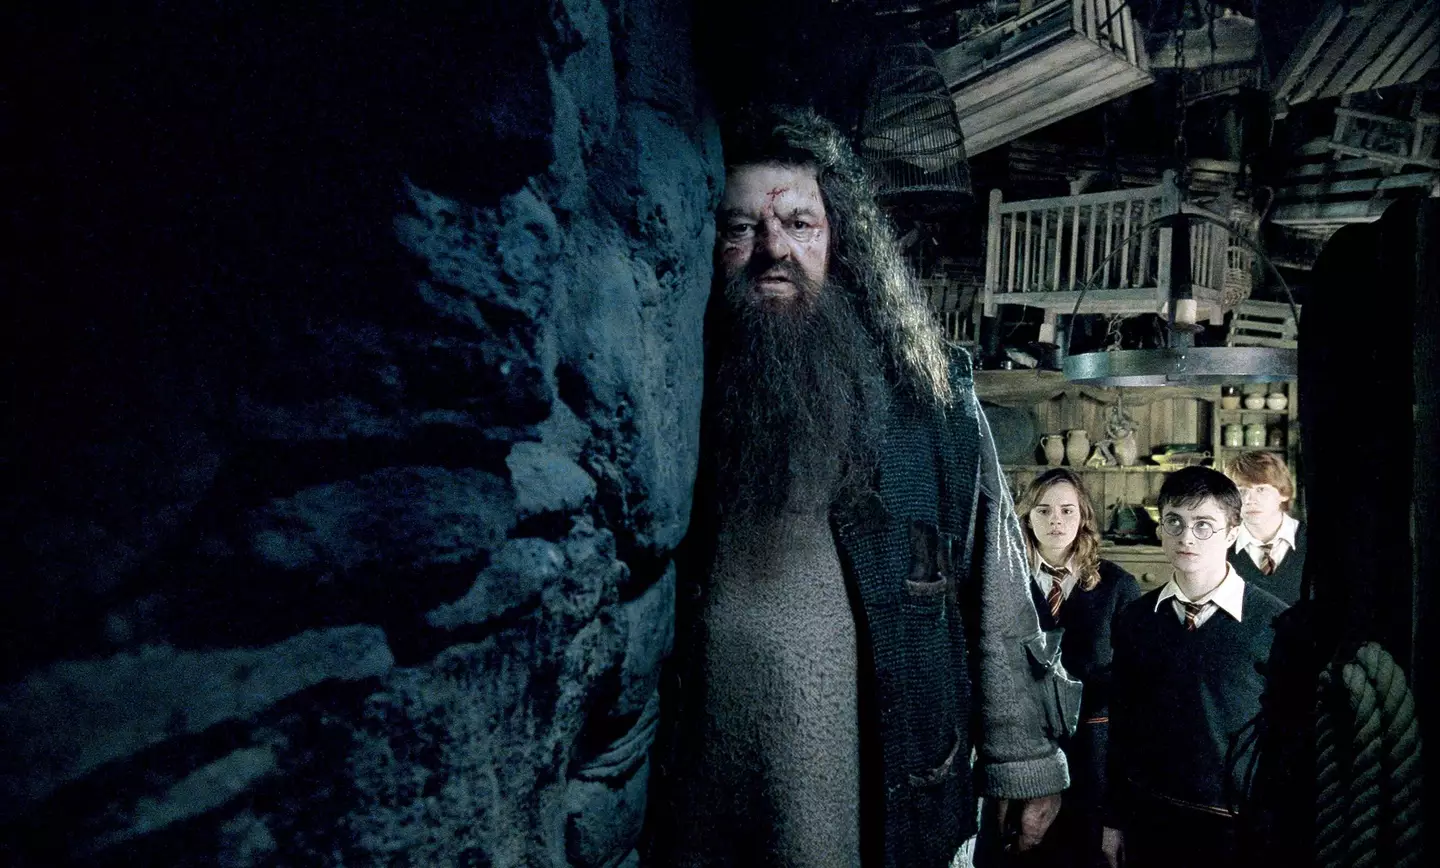 Coltrane is best known for his role as Rubeus Hagrid in the Harry Potter franchise.